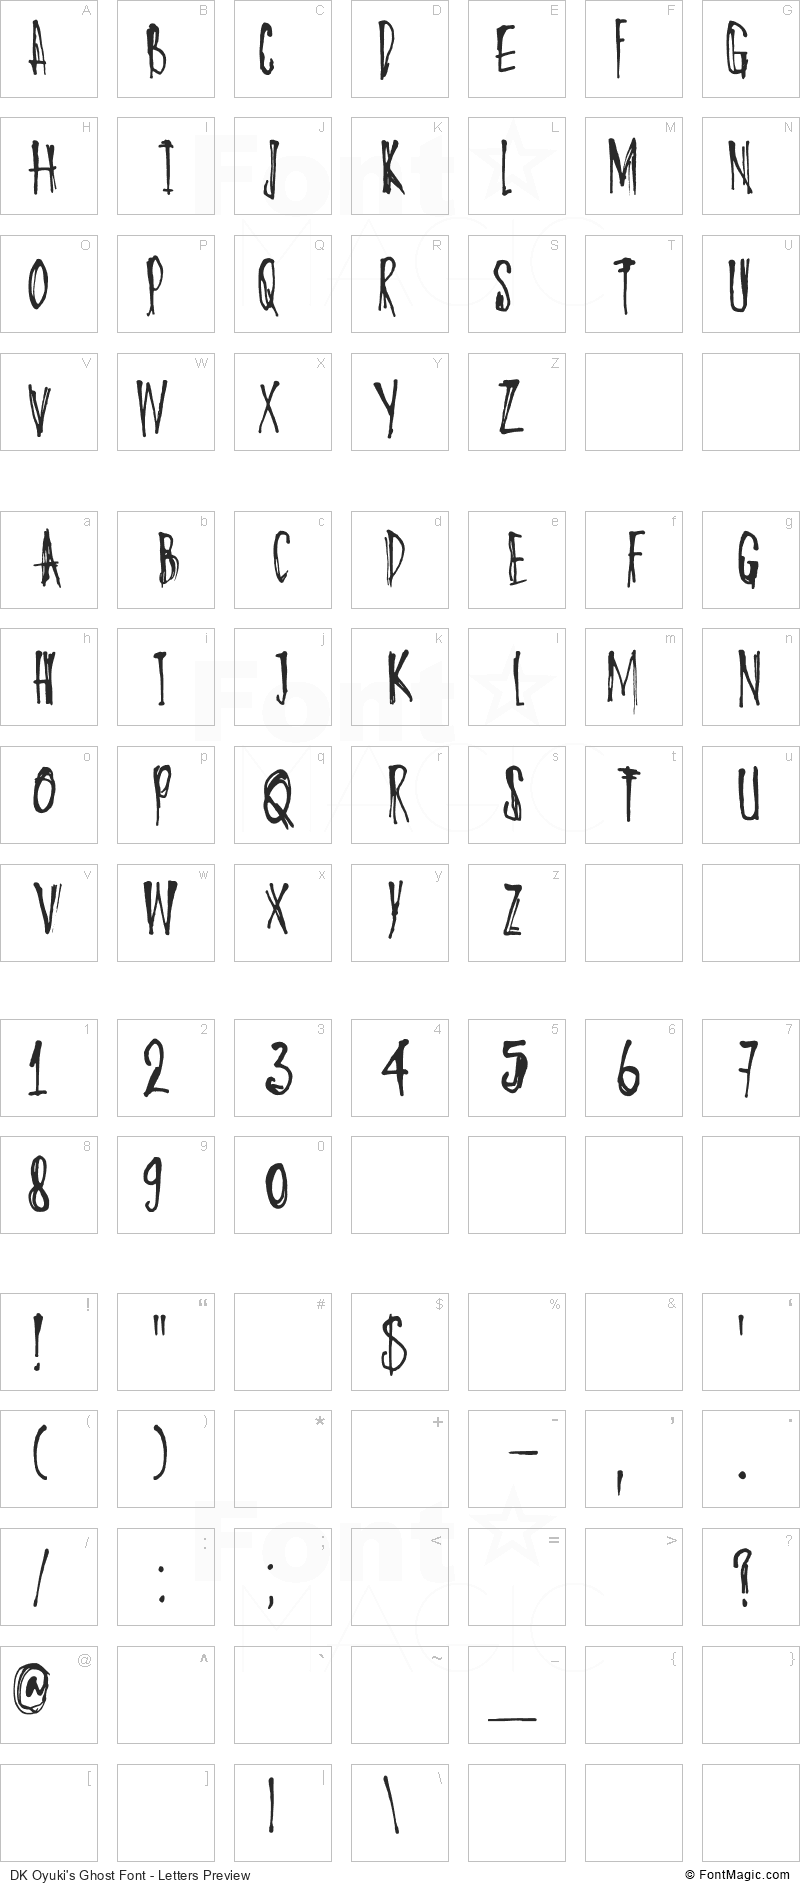 DK Oyuki’s Ghost Font - All Latters Preview Chart